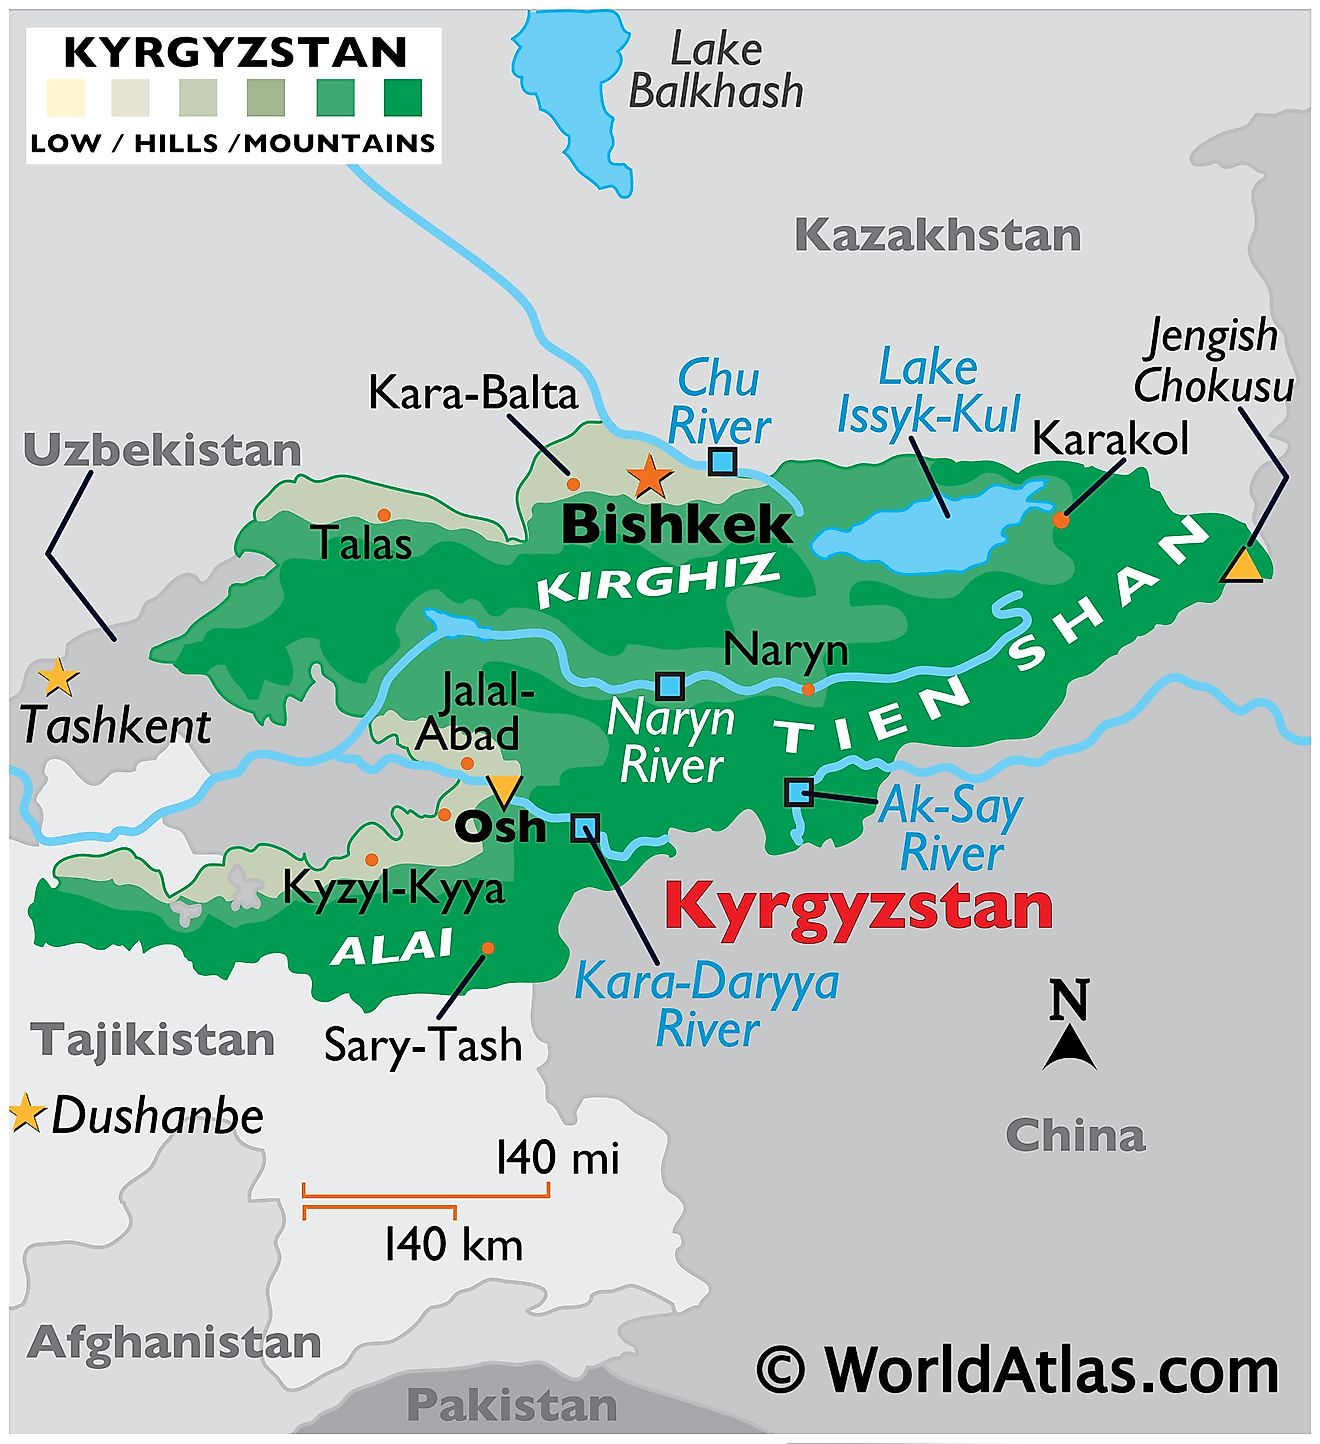 Physical Map of Kyrgyzstan showing relief, highest point and lowest points, major mountain ranges, rivers, important urban centres, etc.